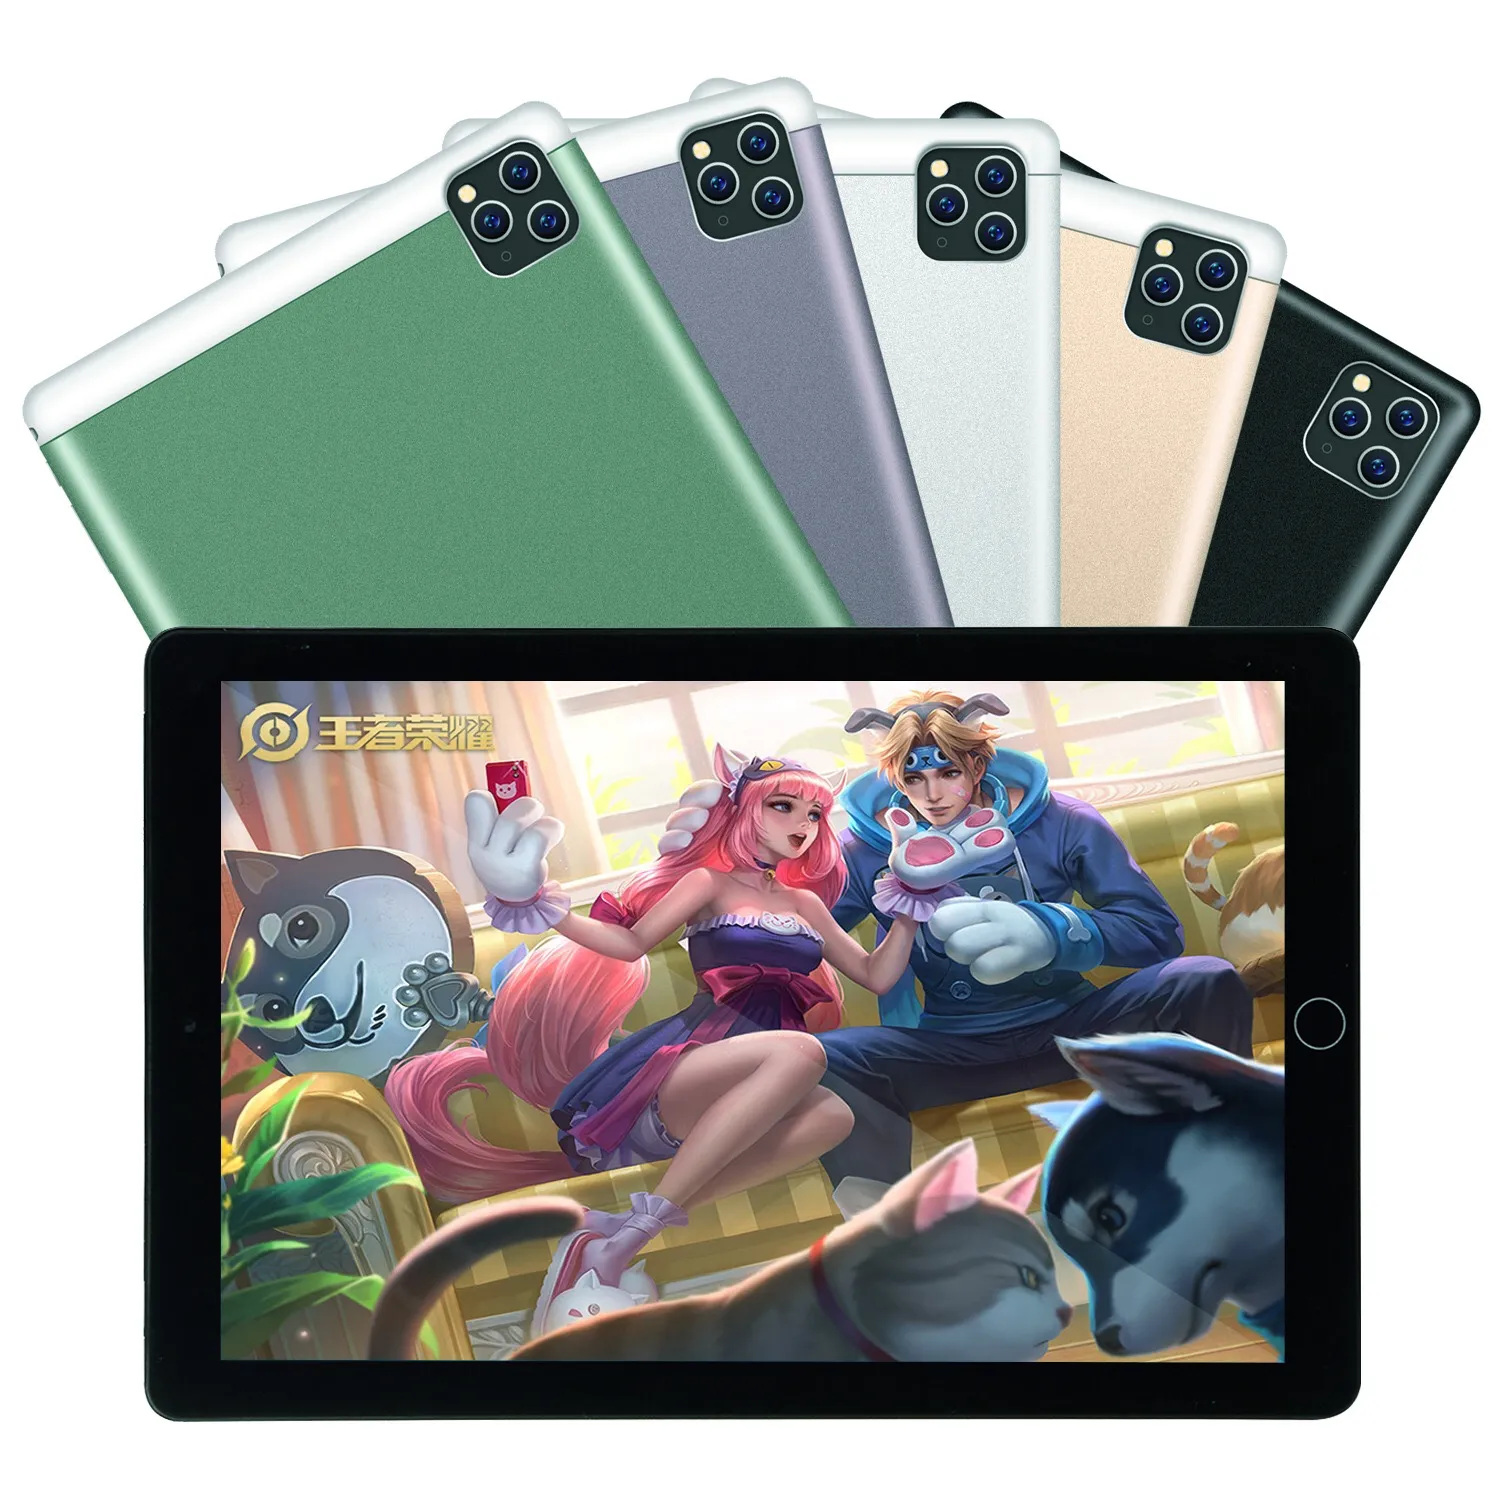 PG11 10 Zoll 32GB ROM Android Tablet 1920*1200 IPS-Bildschirm HD-Display 10 Zoll Quad-Core-Dual-Sim-Tablet PC Android 5G Tablet/10.1